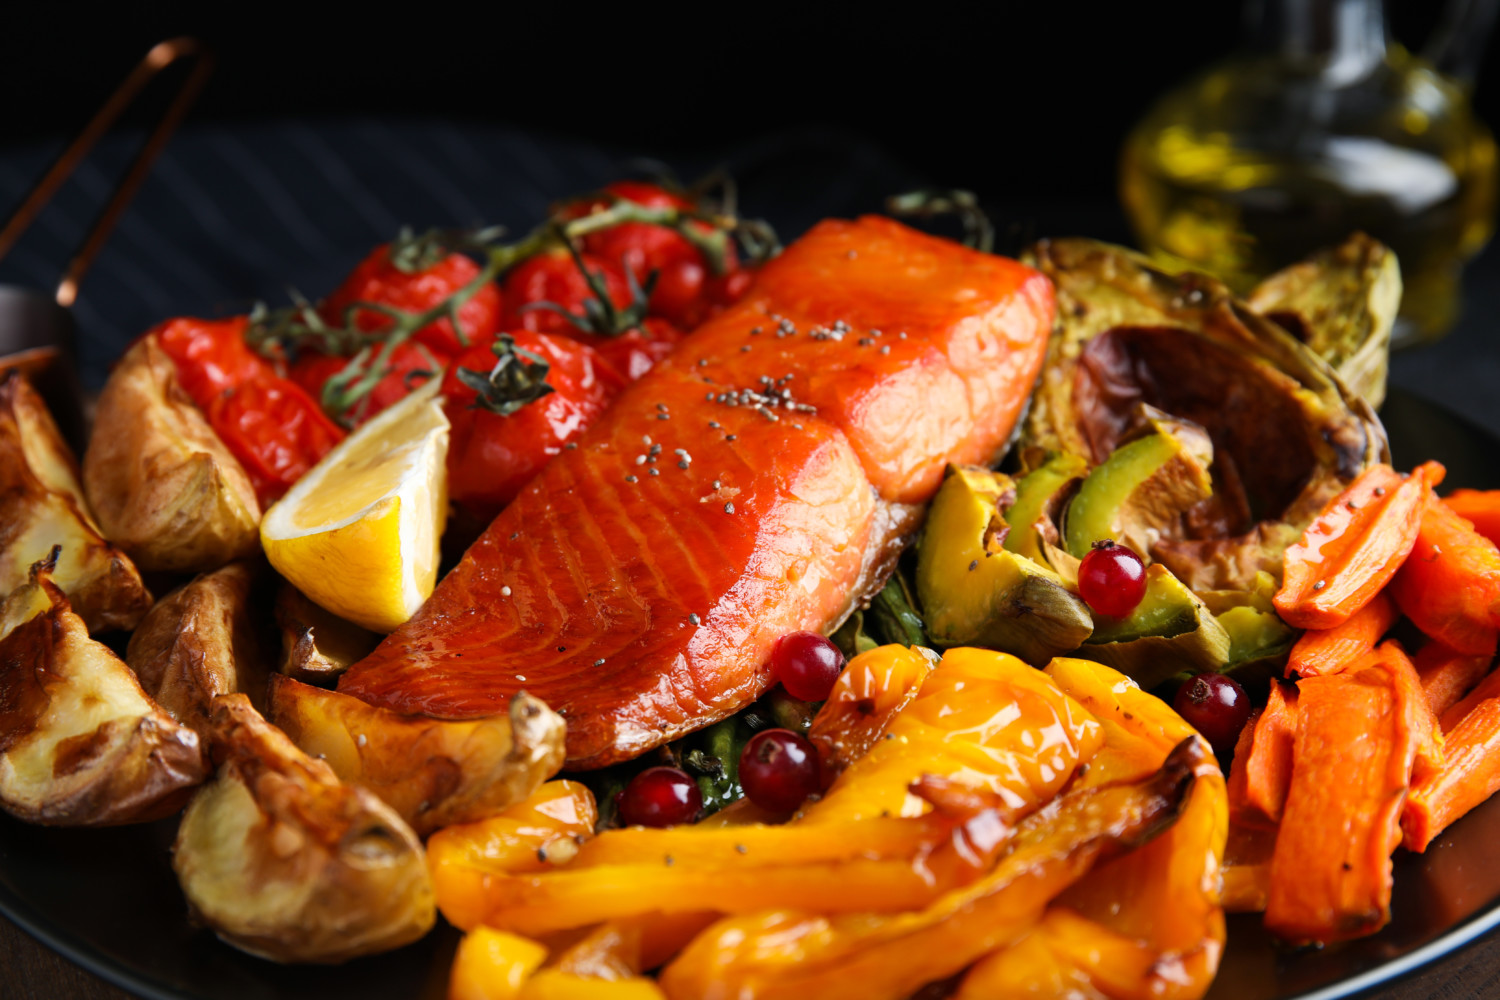 cooked salmon on plate with vegetables